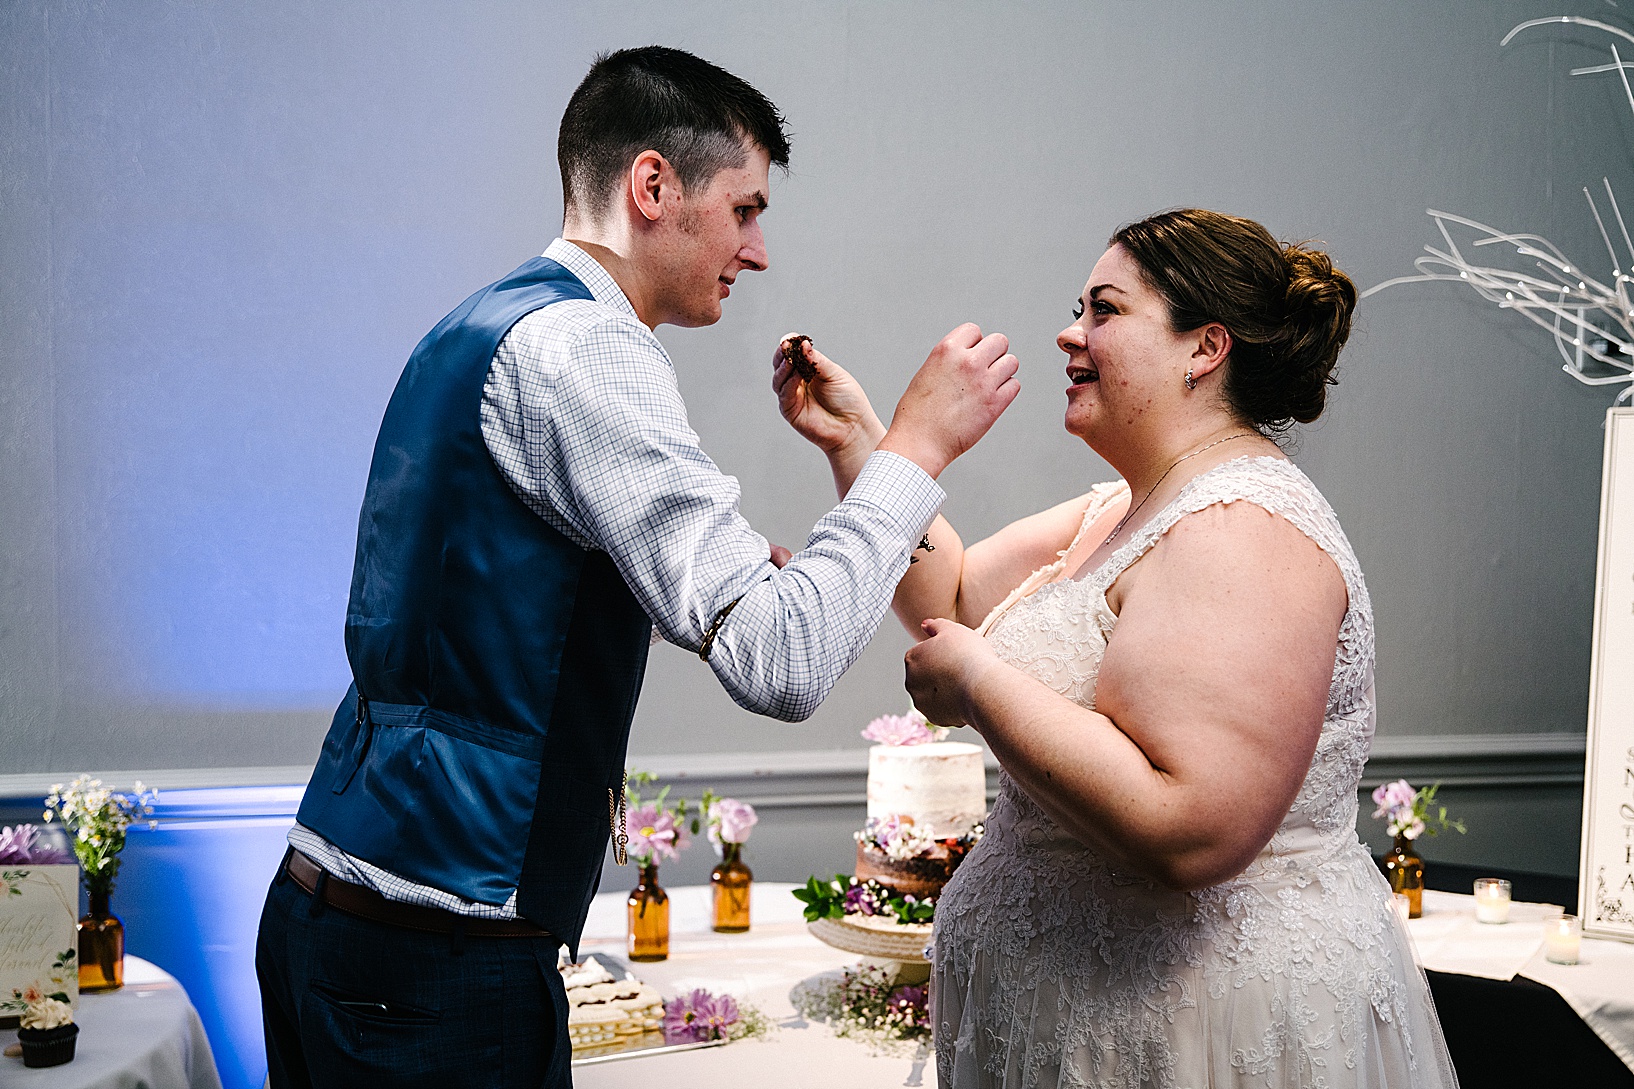 Groom and bride feed each other cake at post wedding celebration